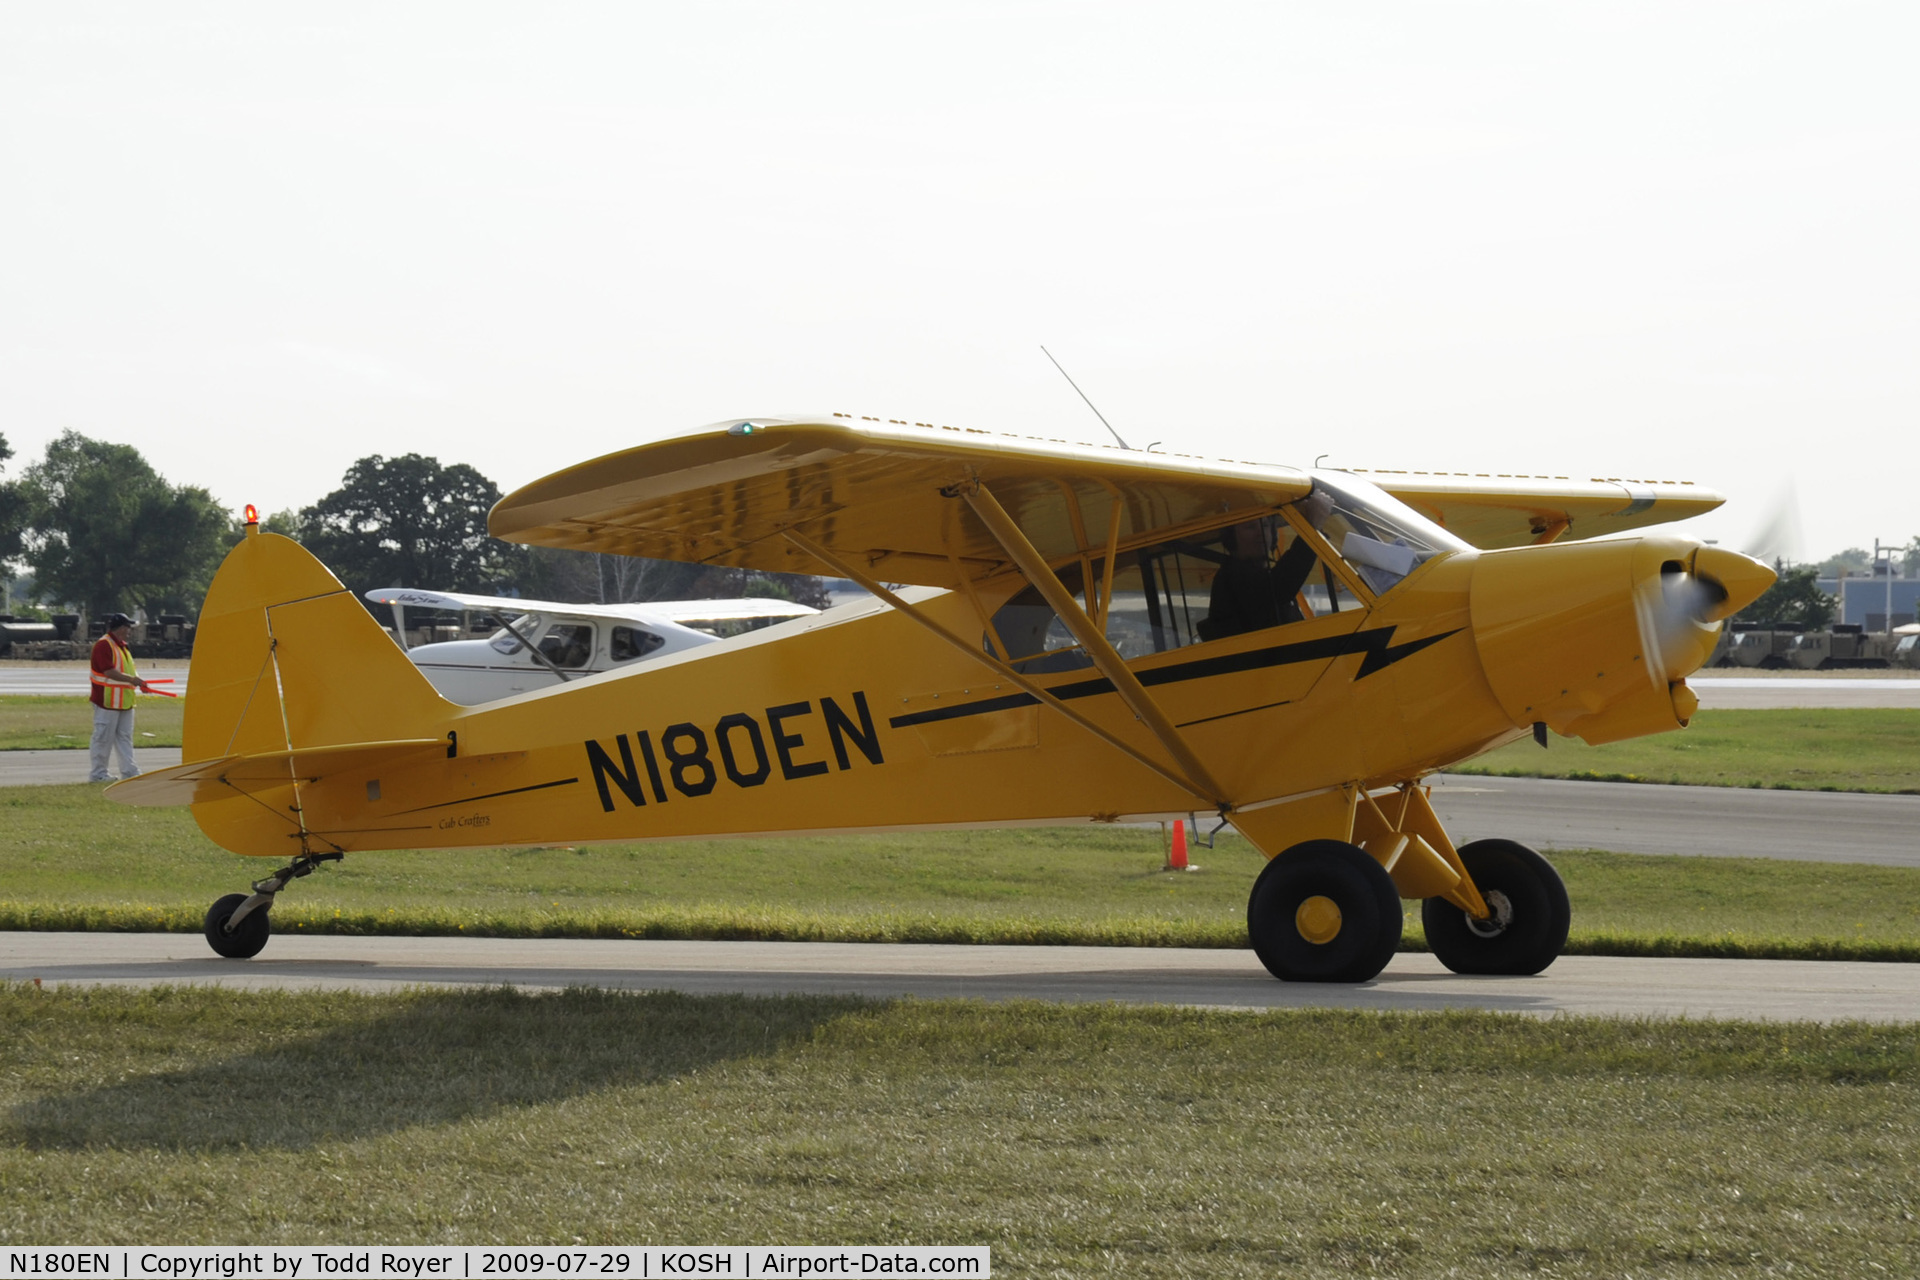 N180EN, 2003 Piper/cub Crafters PA-18-150 C/N 9966CC, Taxi for departure